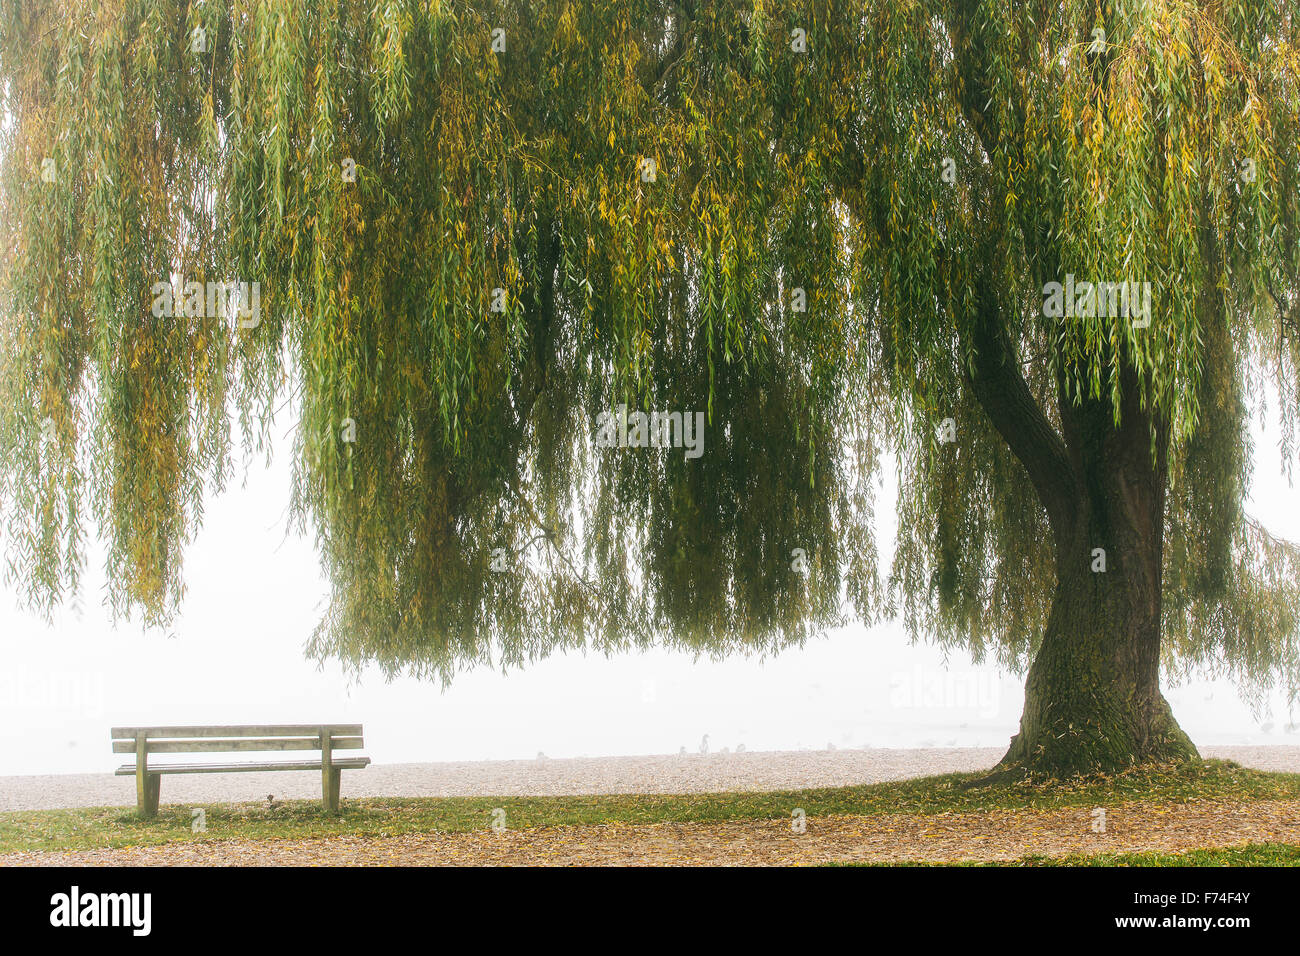 Babylon willow or weeping willow (Salix babylonica), bench, waterfront, foggy atmosphere, Lake Ammer, Upper Bavaria, Germany Stock Photo